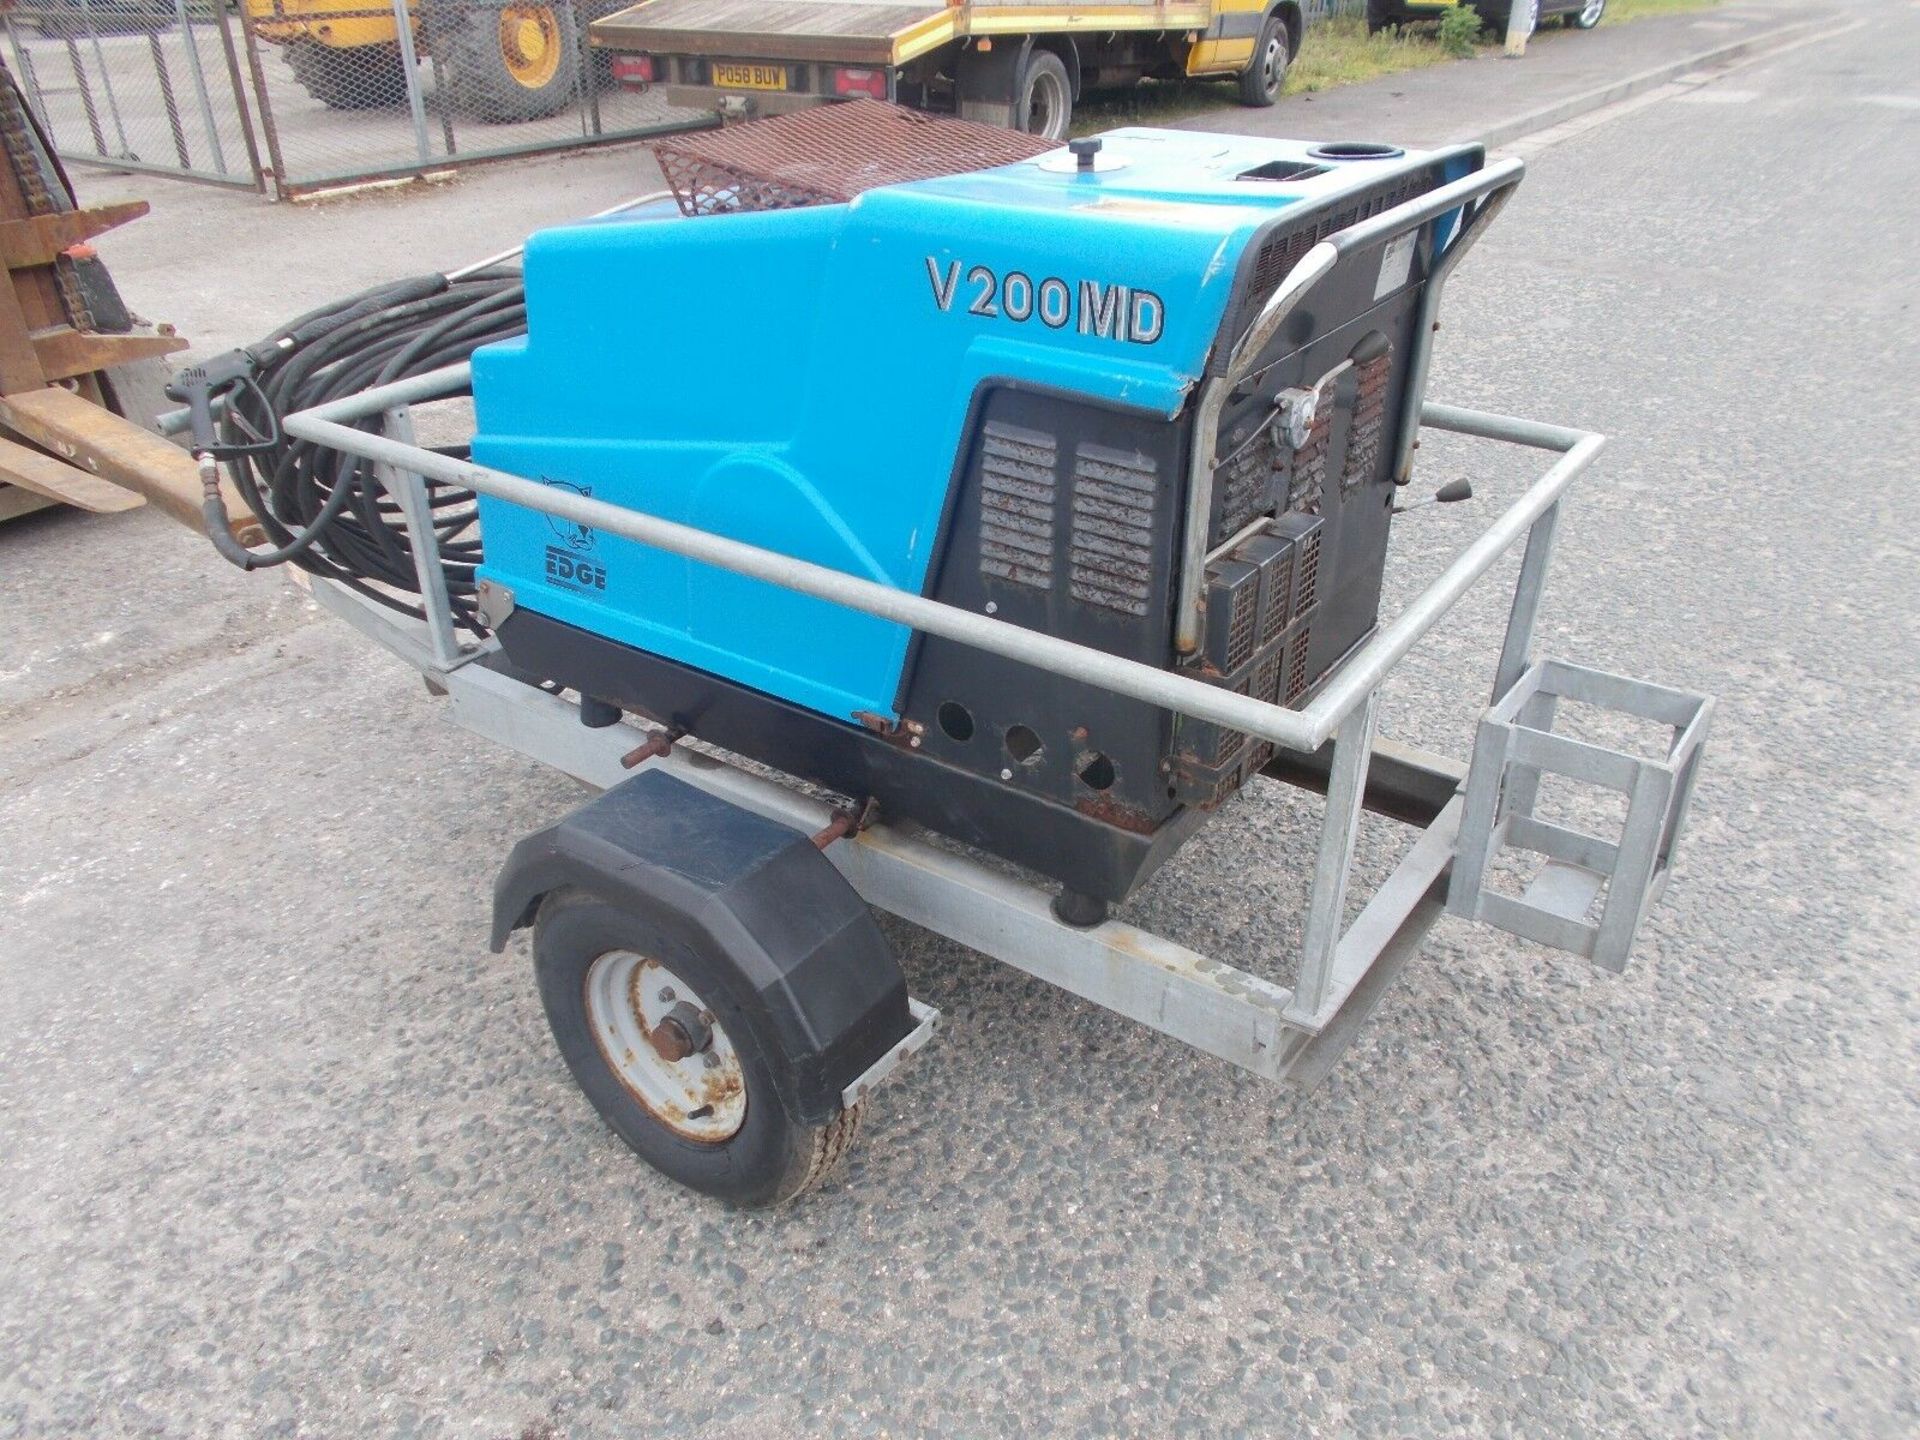 Edge V 200 MD Towable Hot & Cold Diesel Engined Pressure Washer - Image 3 of 7